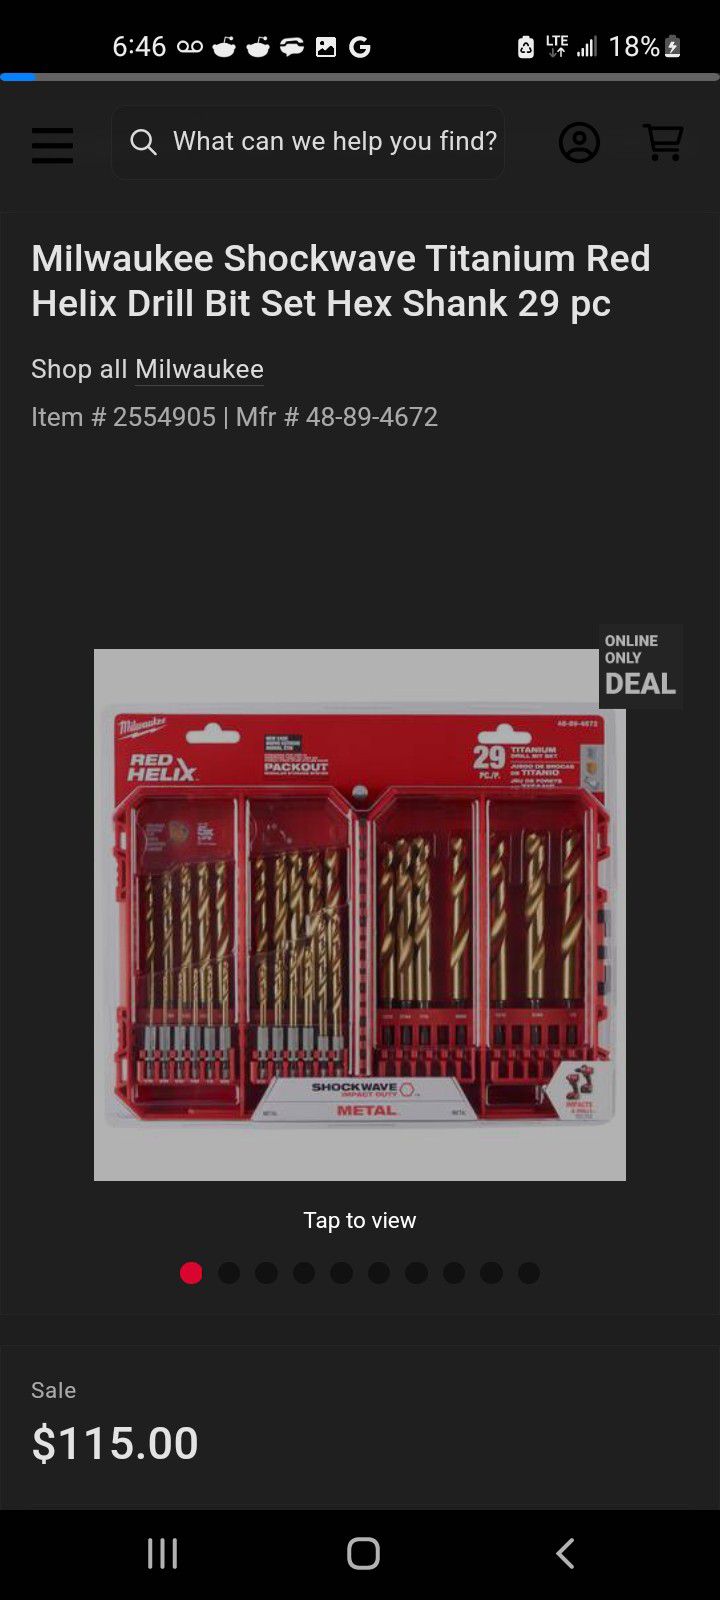 Power Drill Bit Set 60% Discount Brand New Milwaukee RED HELIX In Stores Cost  115  